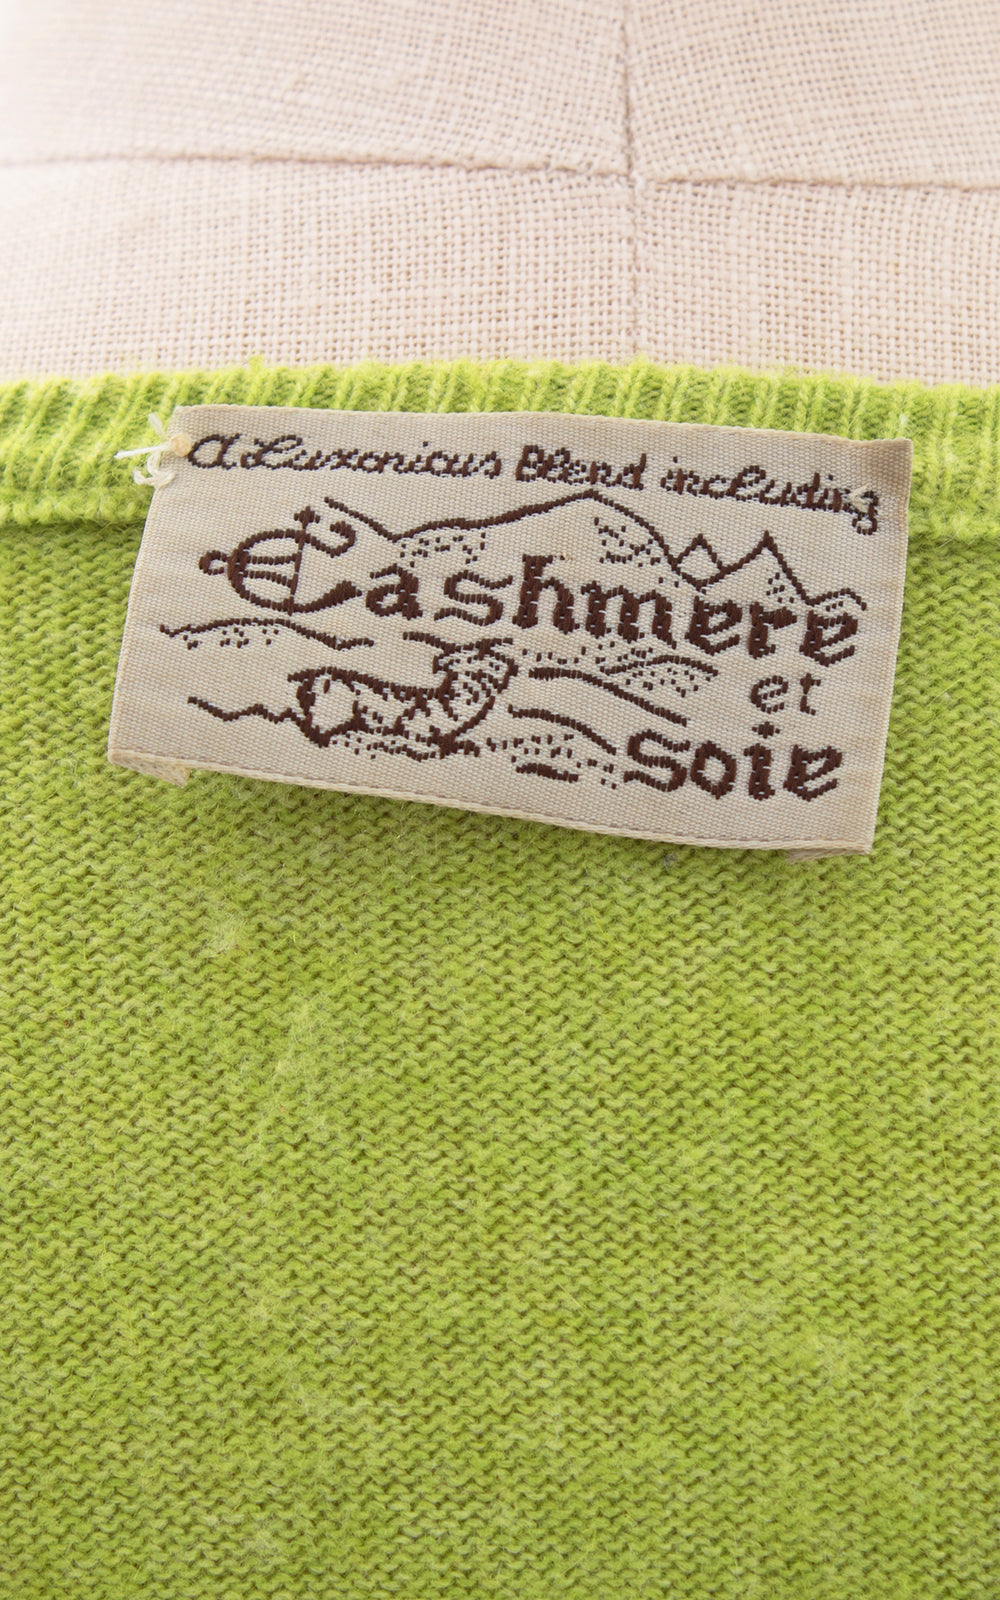 1950s Lime Green Cashmere Knit Sweater Top